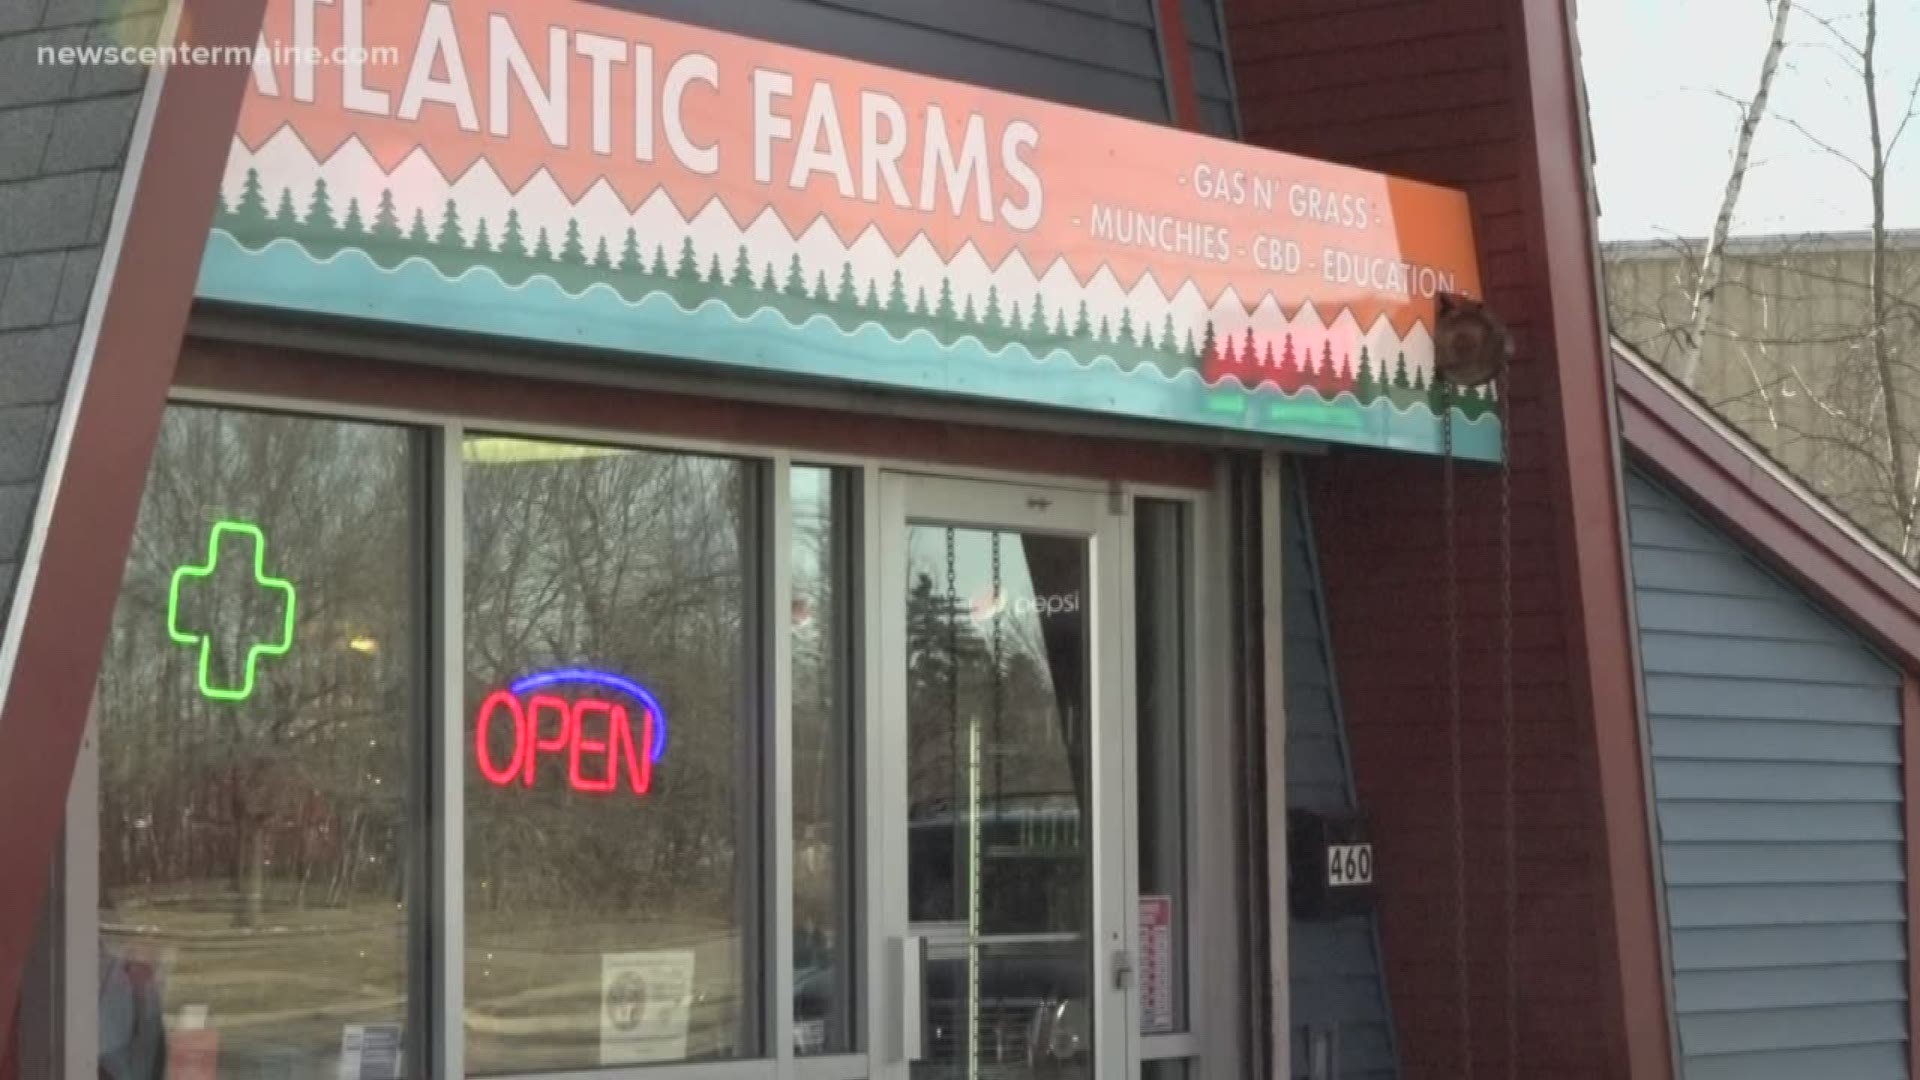 Maine's first 'gas and grass' store opens